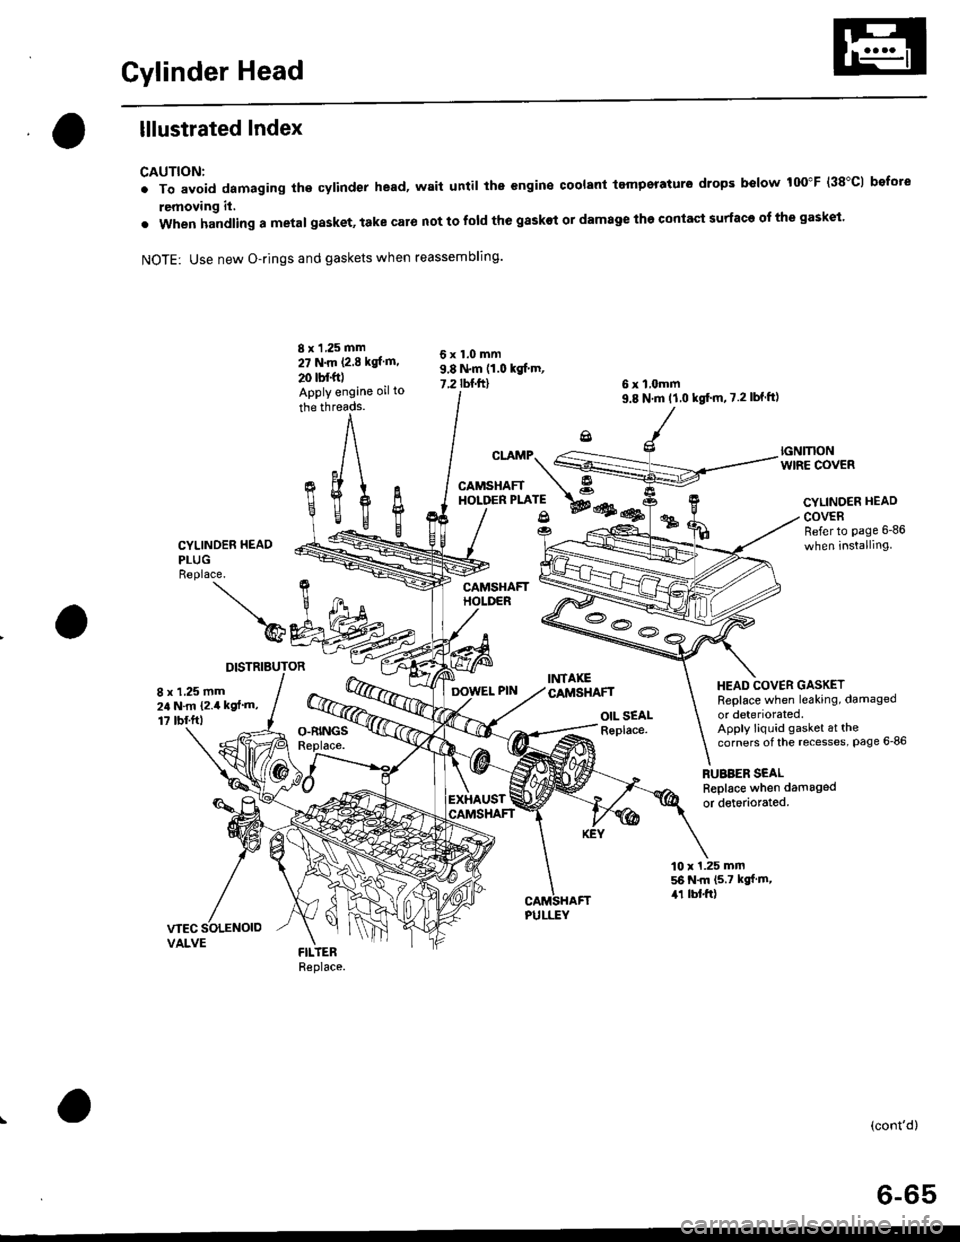 HONDA CIVIC 1998 6.G Workshop Manual Cylinder Head
lllustrated Index
CAUTION:
. To avoid damaging the cylinder head, wait until the engine coolant tempsraturo drops below 100"F (38"C1 bofote
removing it,
. when handling a metal gasket, t